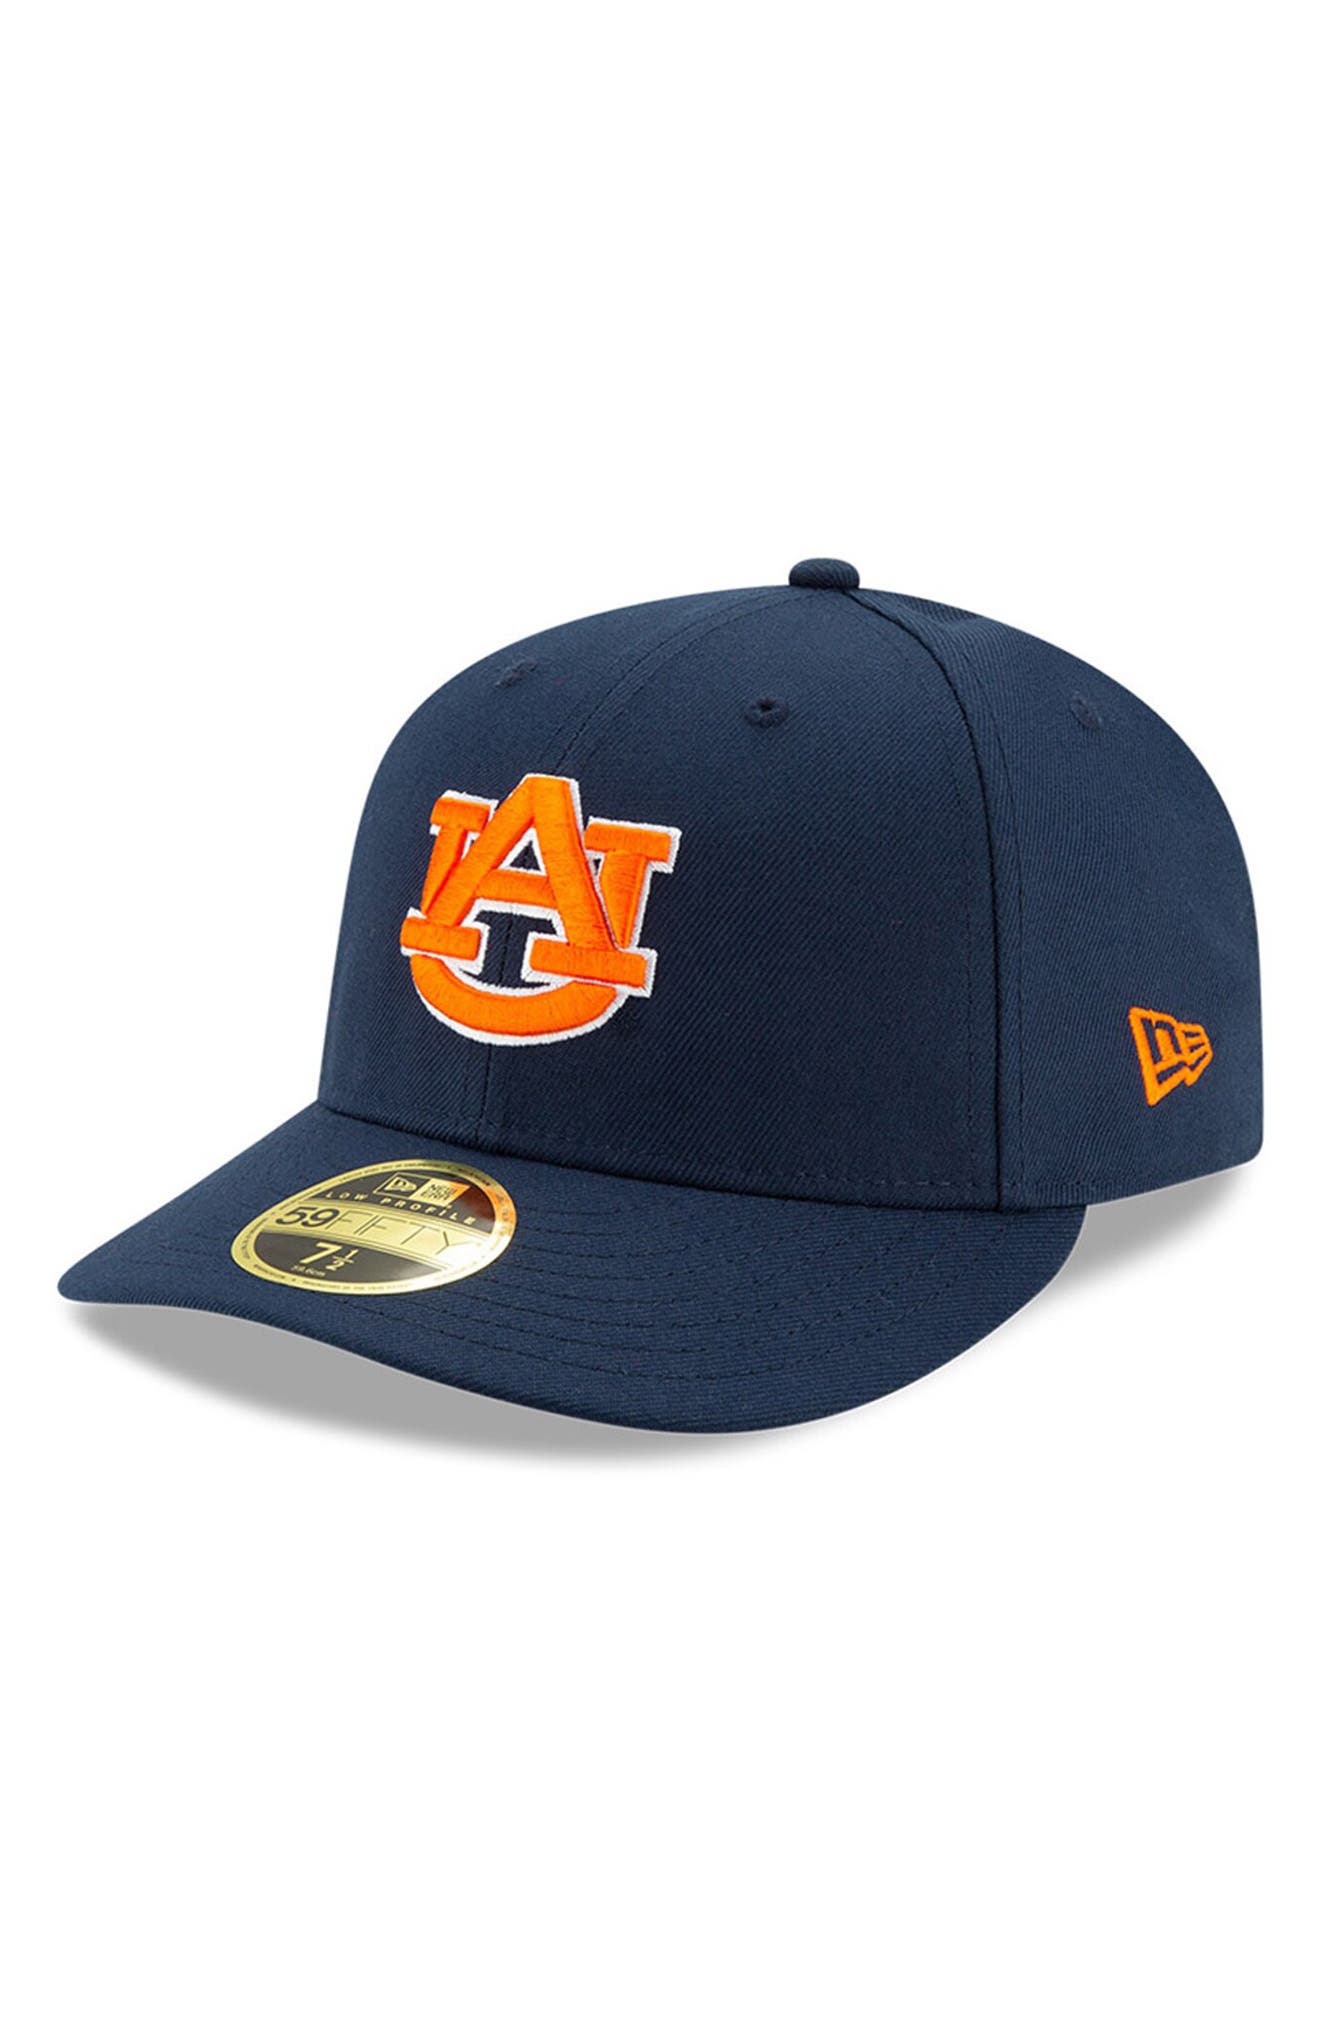 NAVY UNSTRUCTURED NEW SPORTS HAT NCAA LICENCED AUBURN TIGERS 